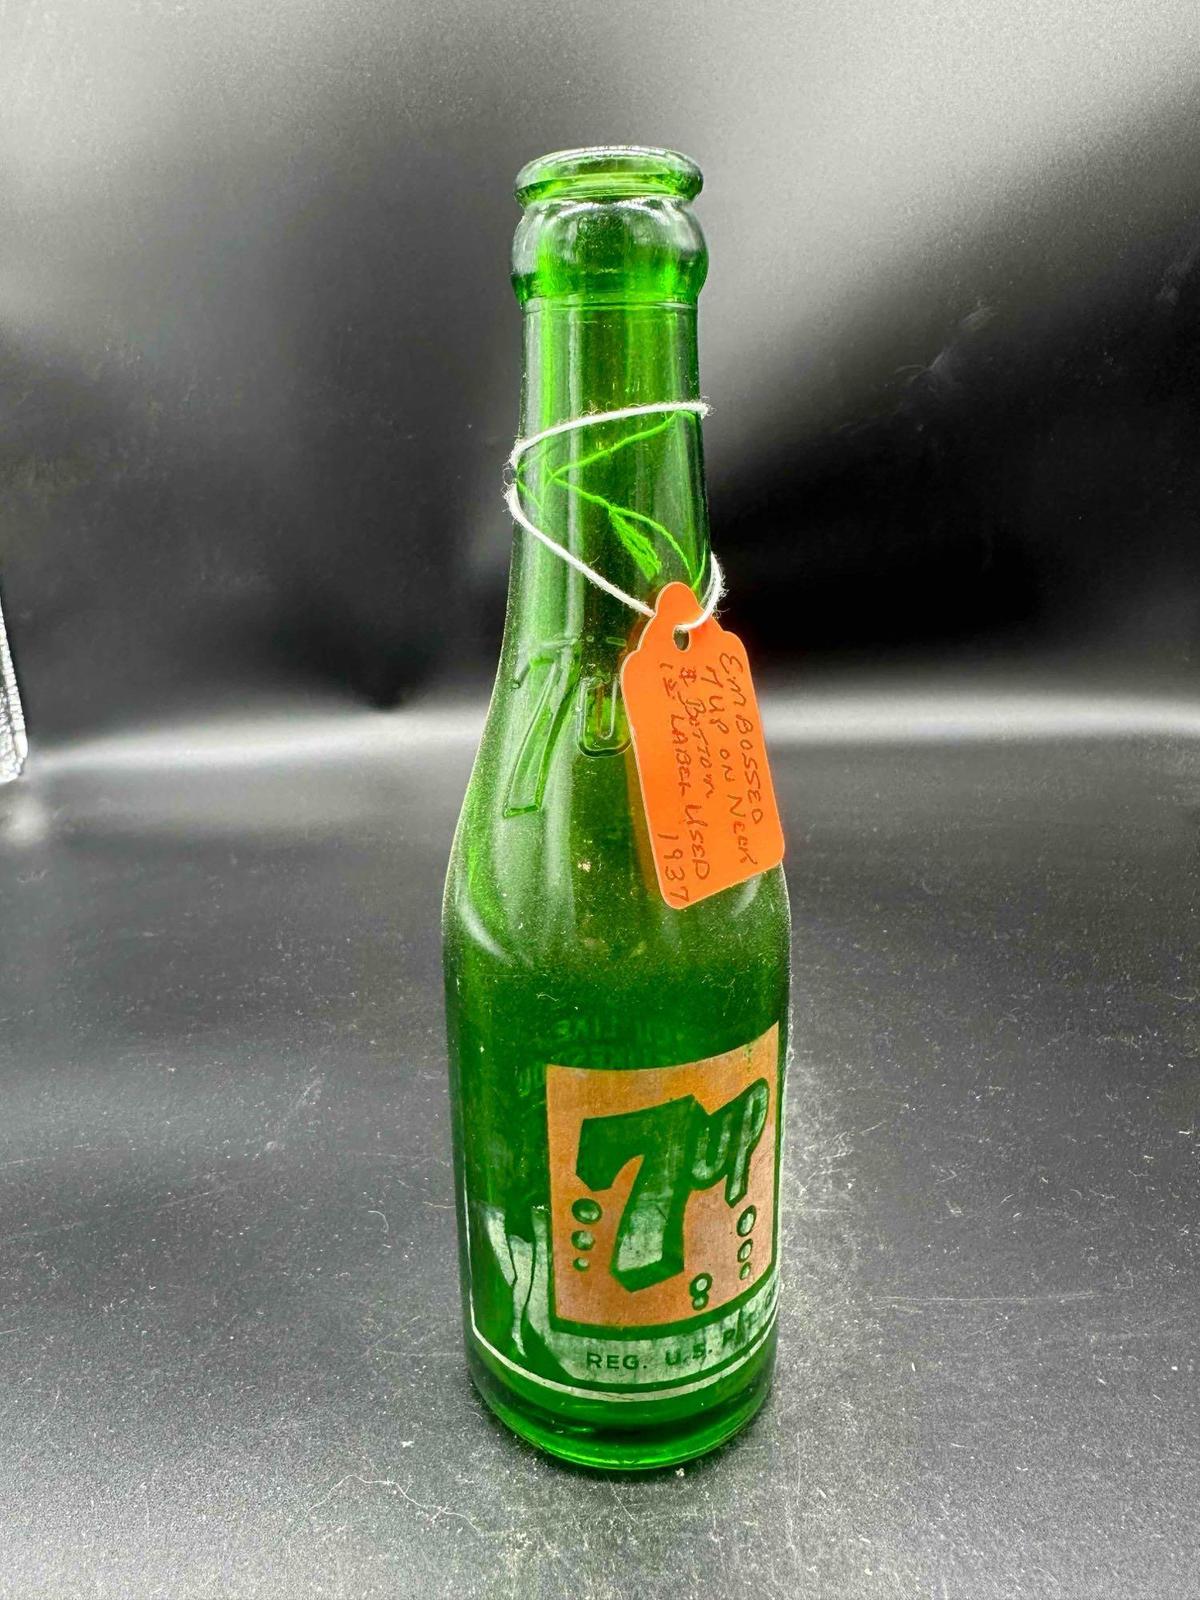 7-UP BOTTLE 1937 NO LOCATION